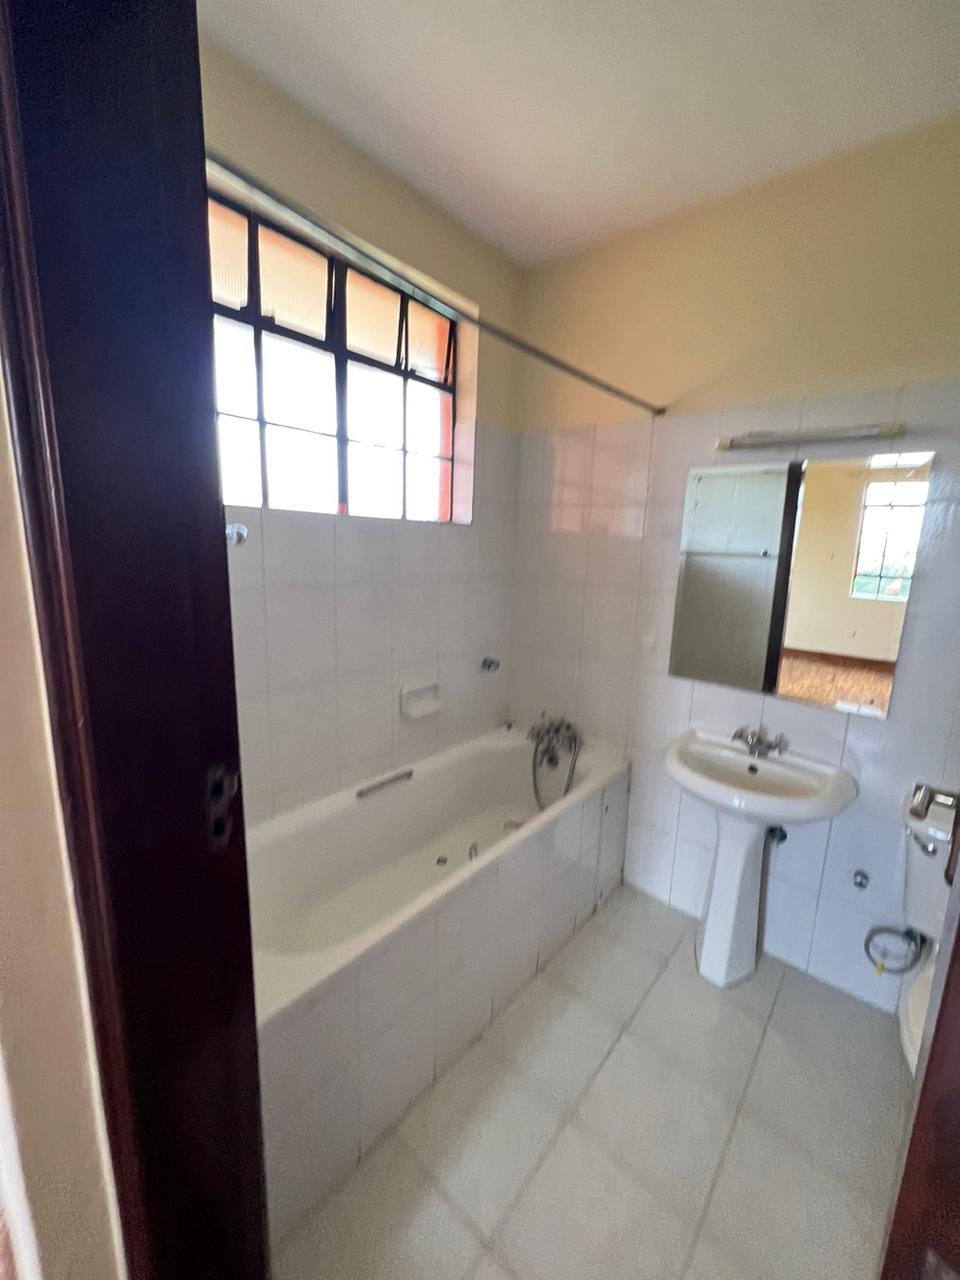 3 Bedroom Apartment Plus DSQ For rent with swimming pool, kids playing area, and borehole. Rent Per month : Ksh 90000